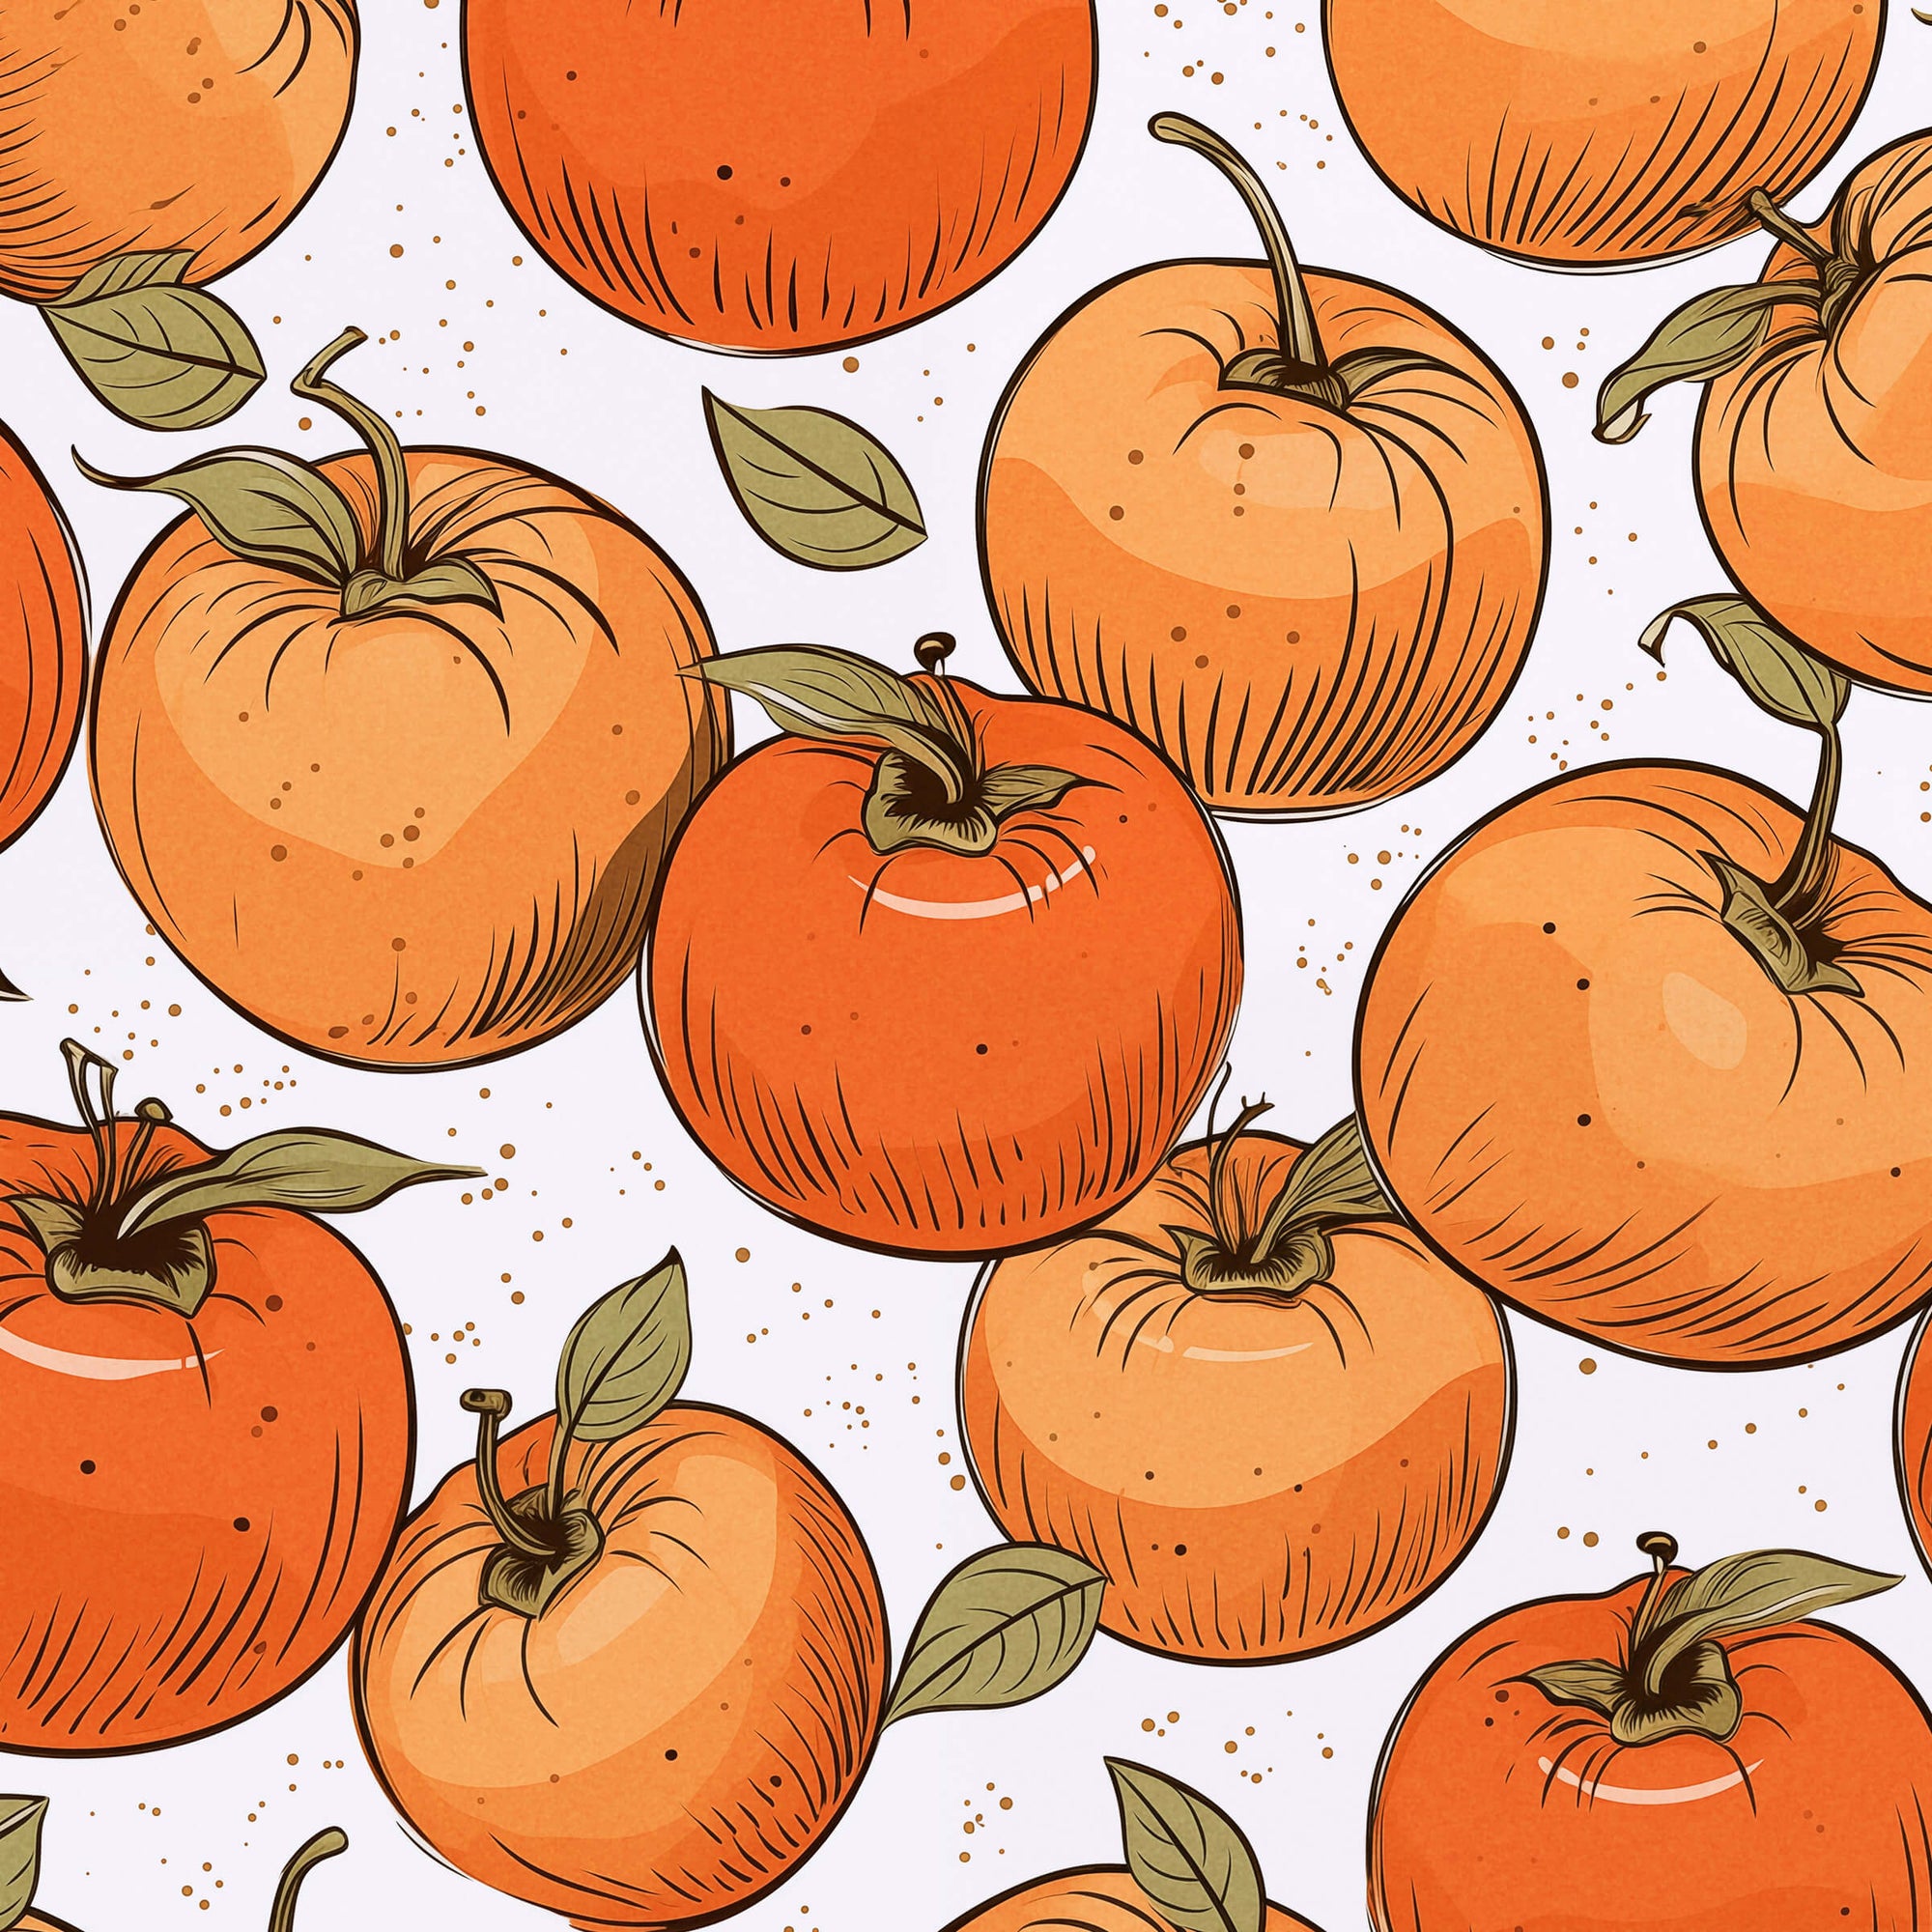 Fun Facts About Persimmons